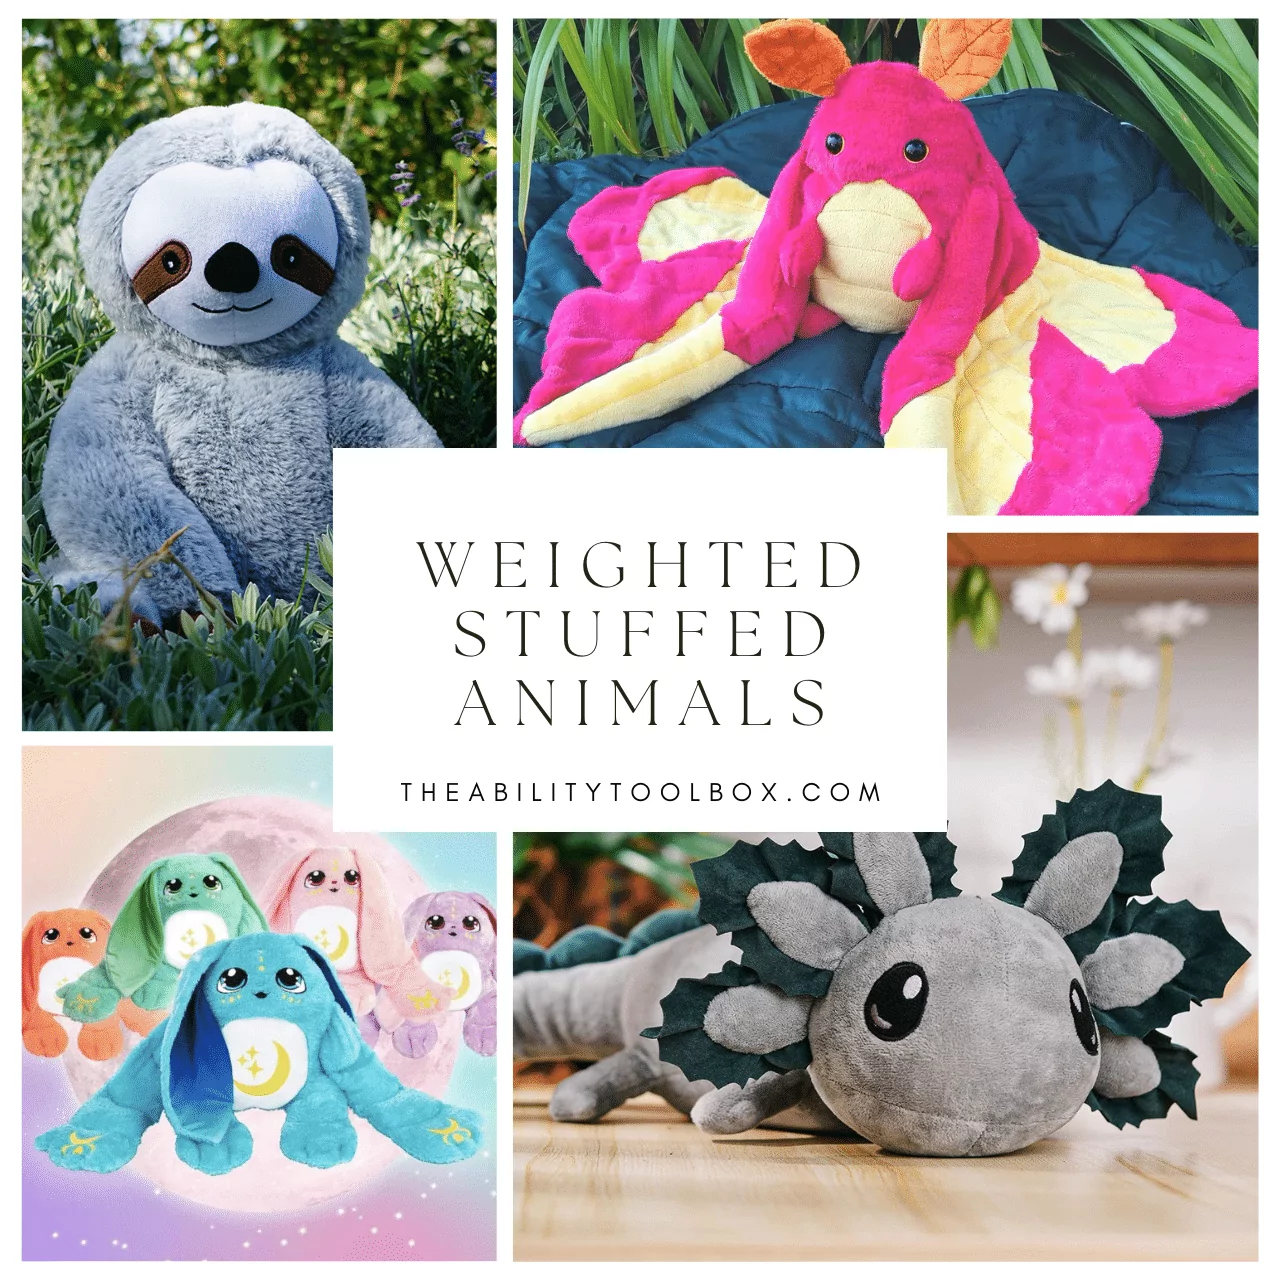 Weighted stuffed animals for kids and adults. Sloth, moth, Moon Pal, Axolotl.